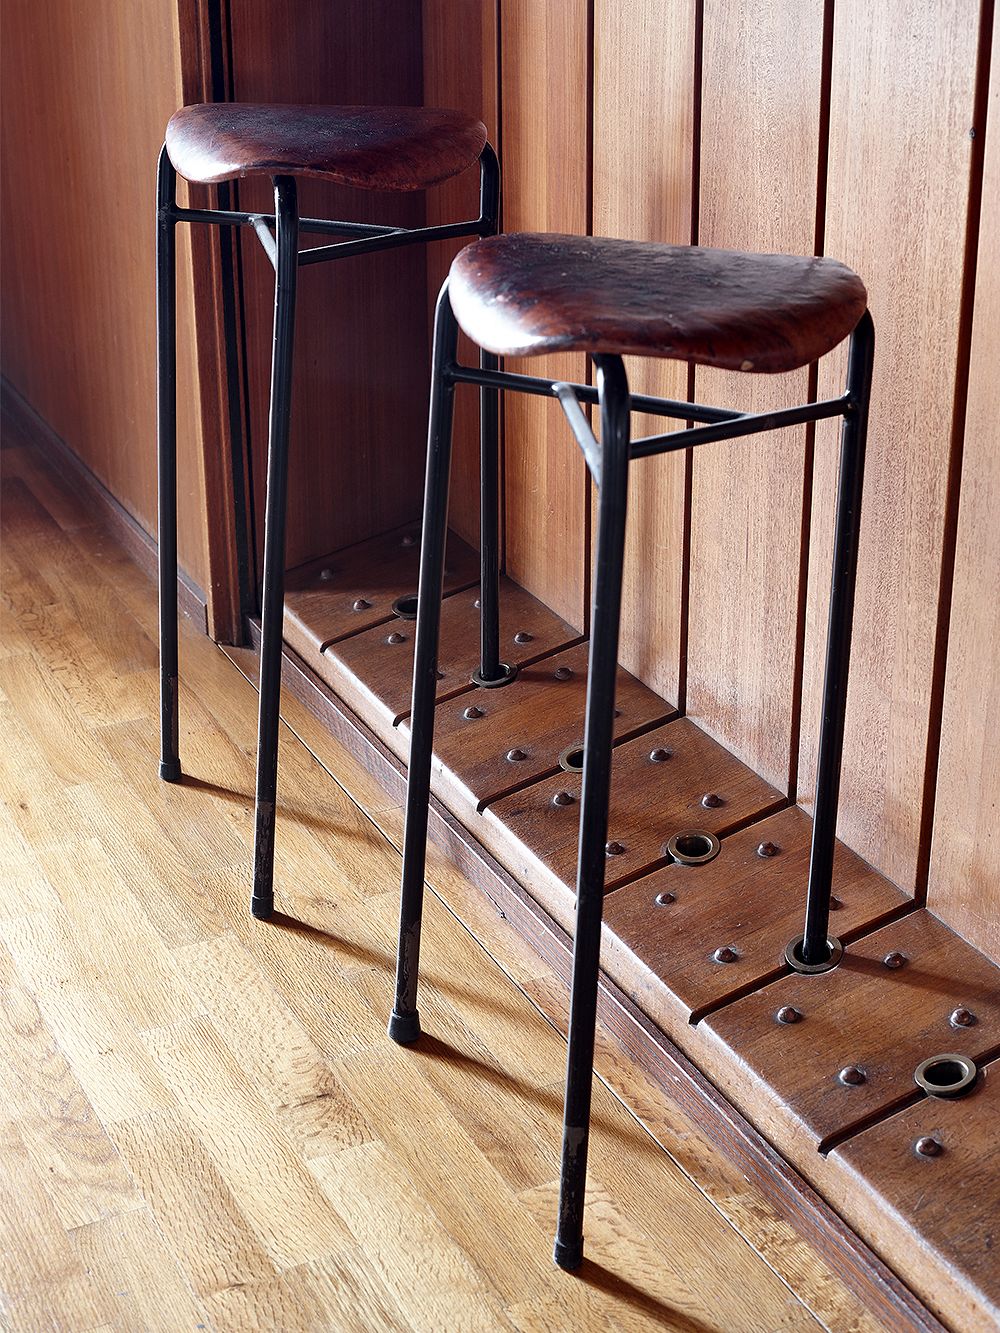 Two extra-tall version of the Lukki stools